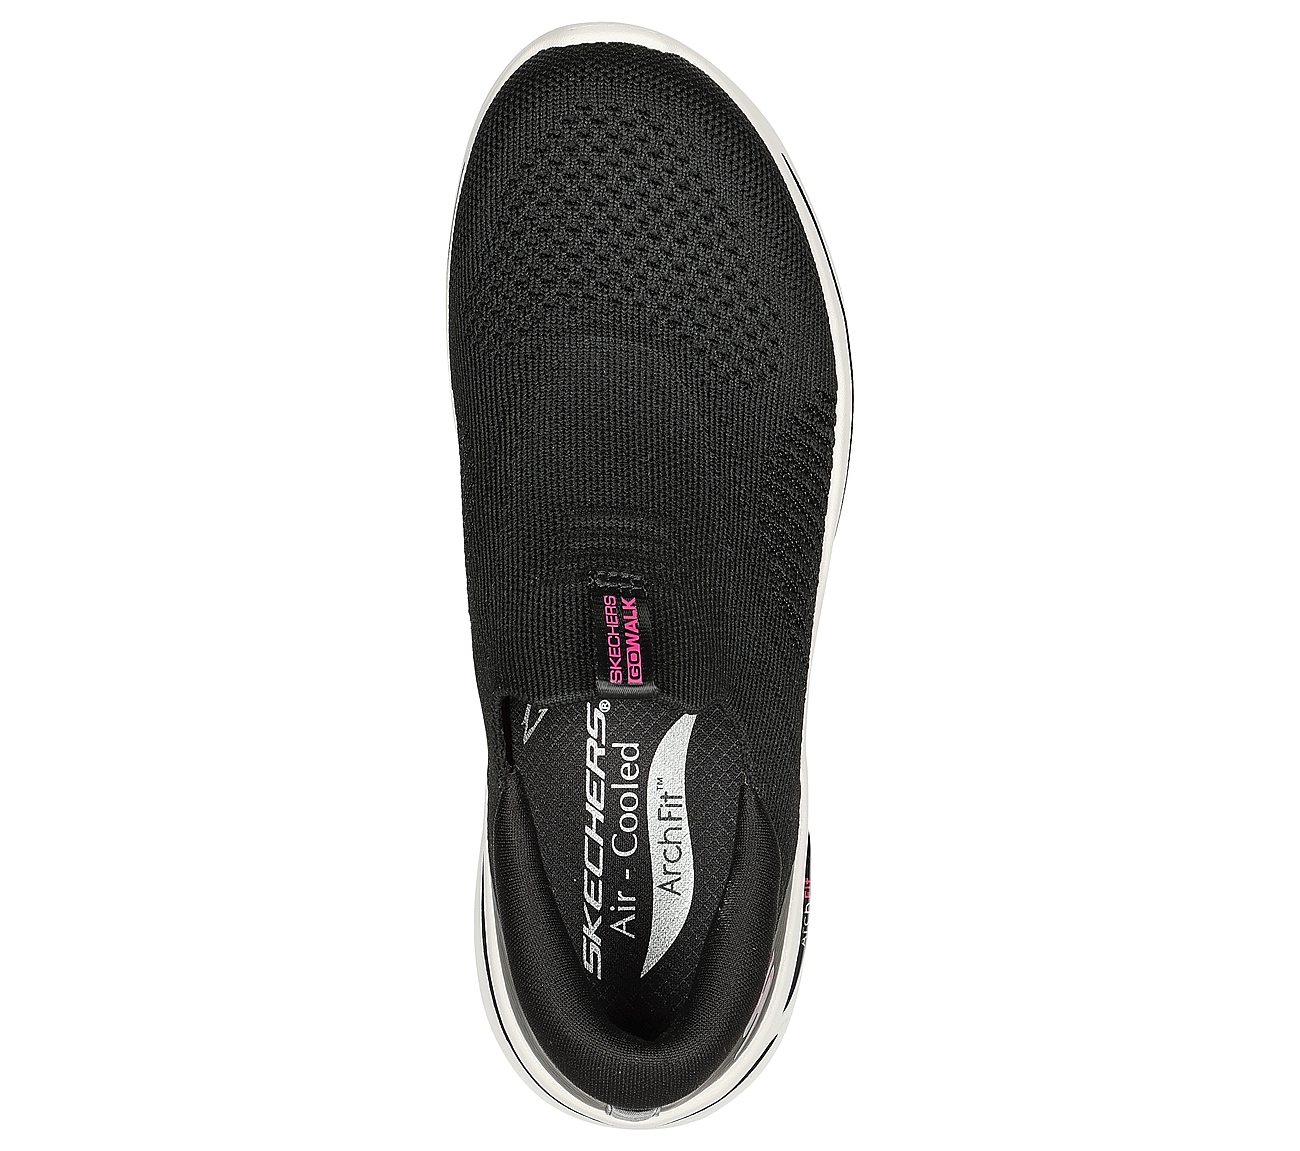 GO WALK ARCH FIT, BLACK/HOT PINK Footwear Top View